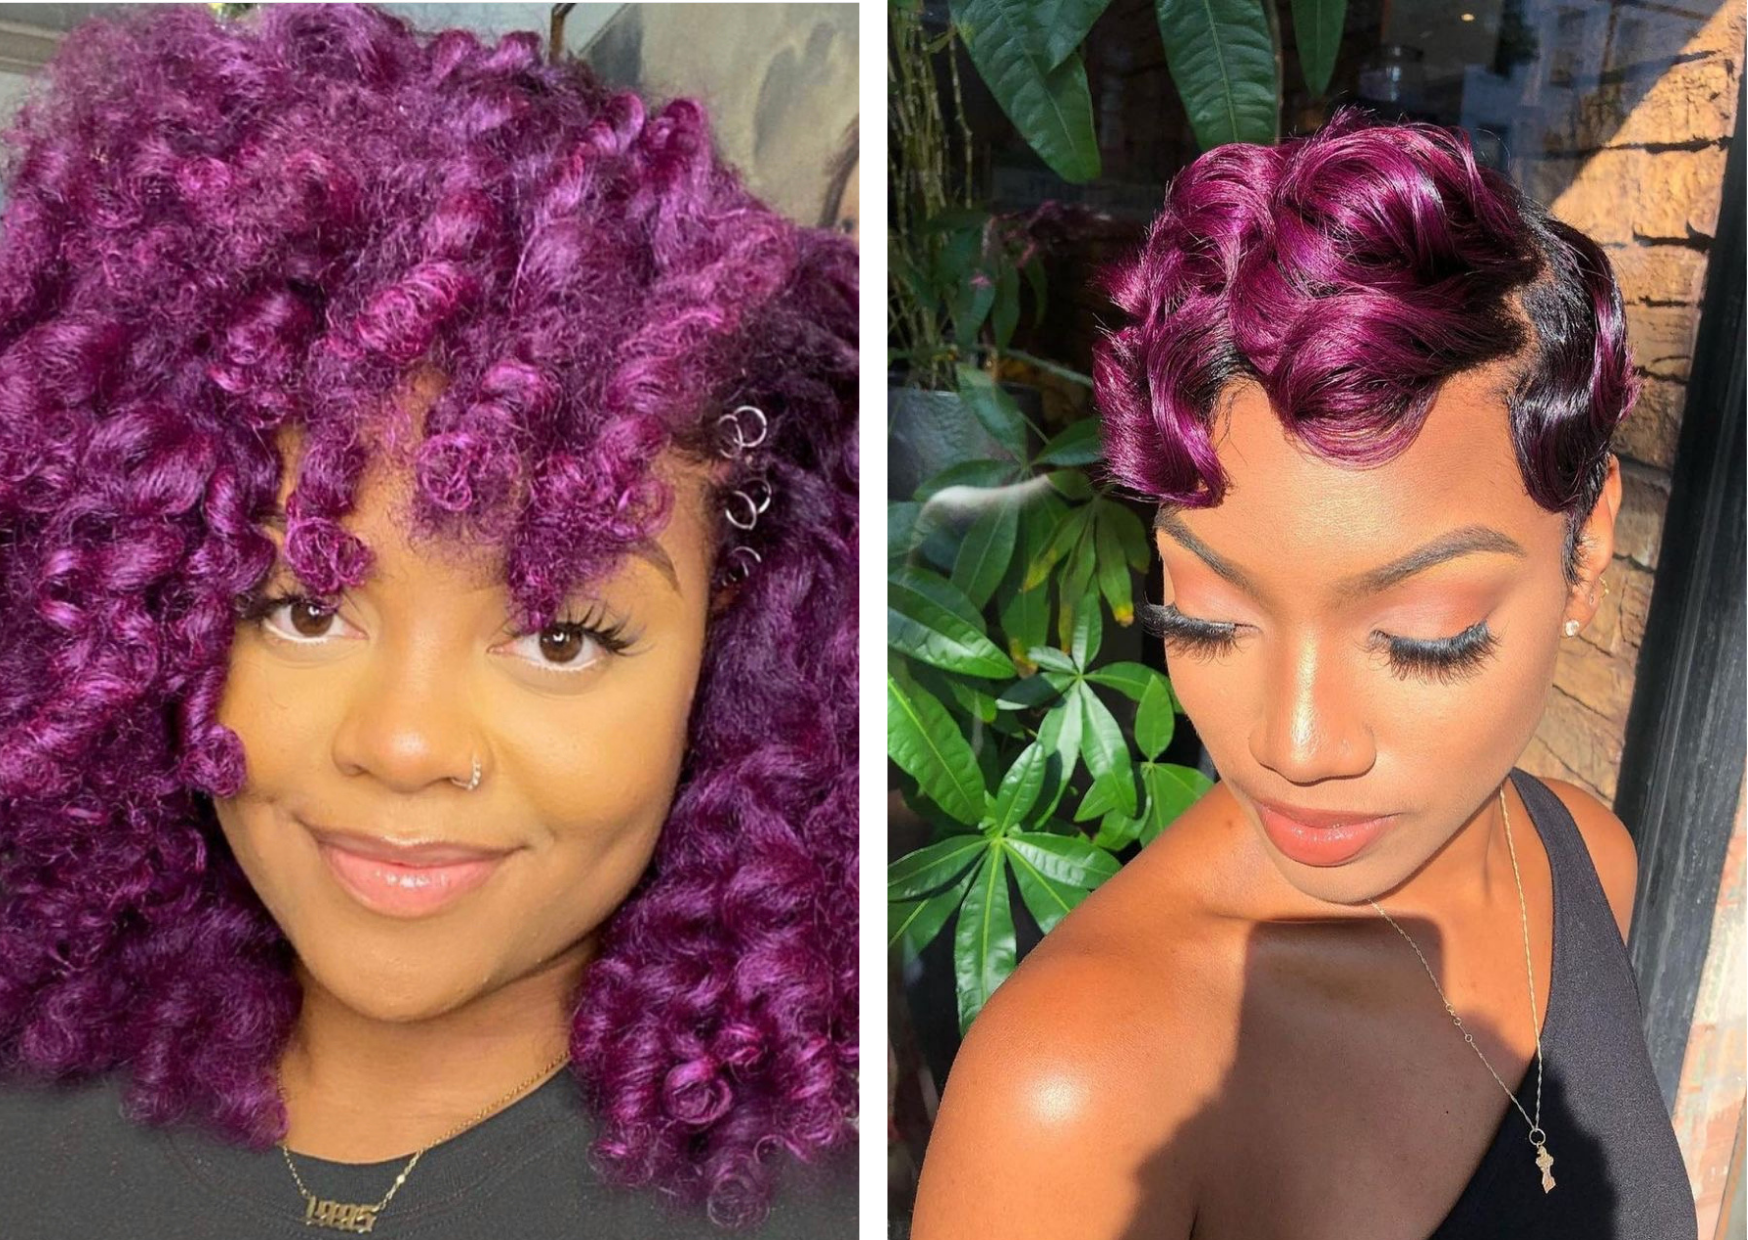 Fall In Love With Purple! Try Purple Hair For The Fall And How To Dye Your  Hair Safely At Home - Emily CottonTop